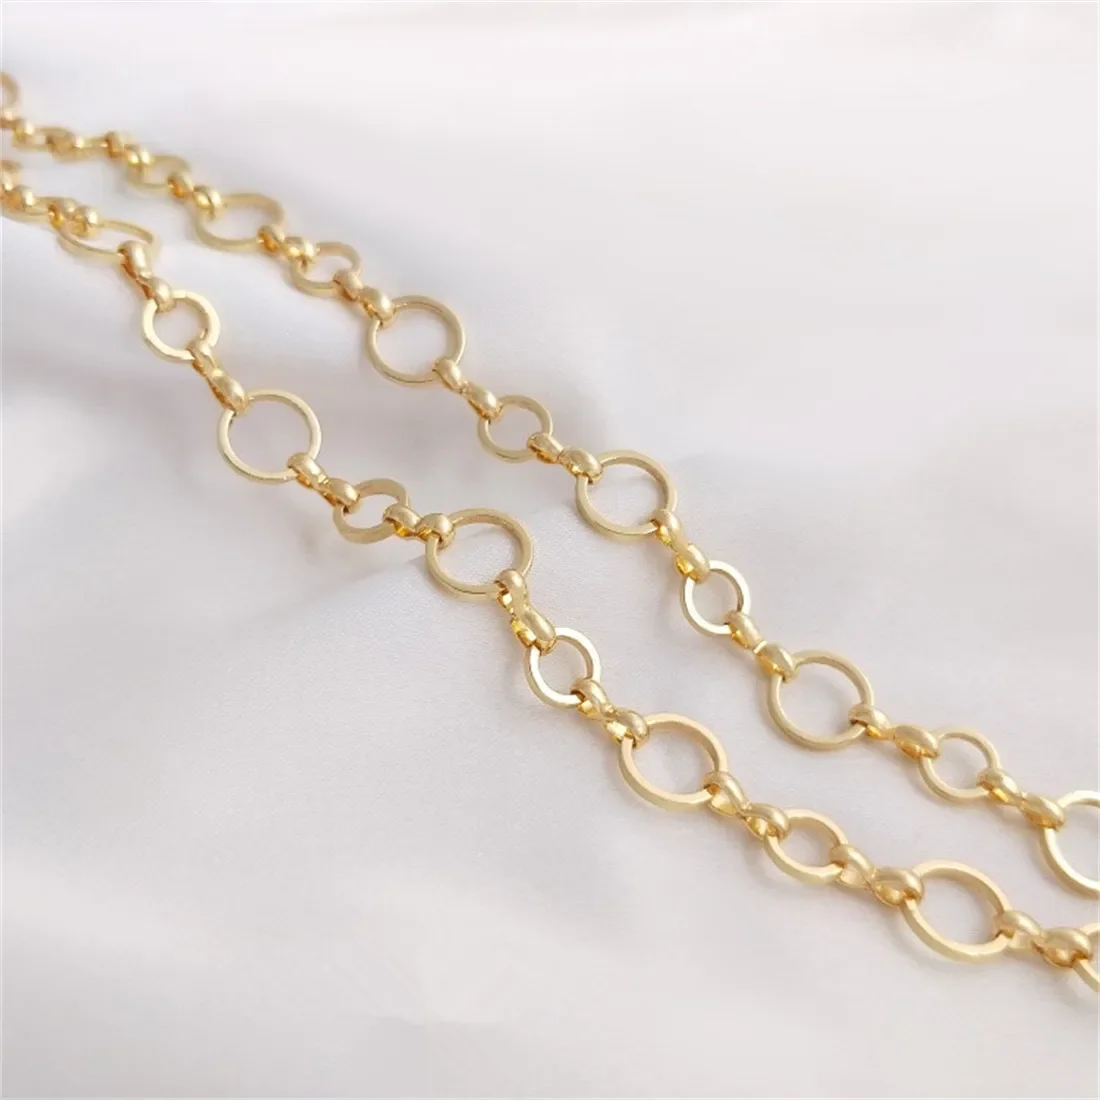 

14K Gold Package 6+8mm Circular O Chain Handcrafted Loose Chain DIY Necklace Bracelet Jewelry Chain Material B647